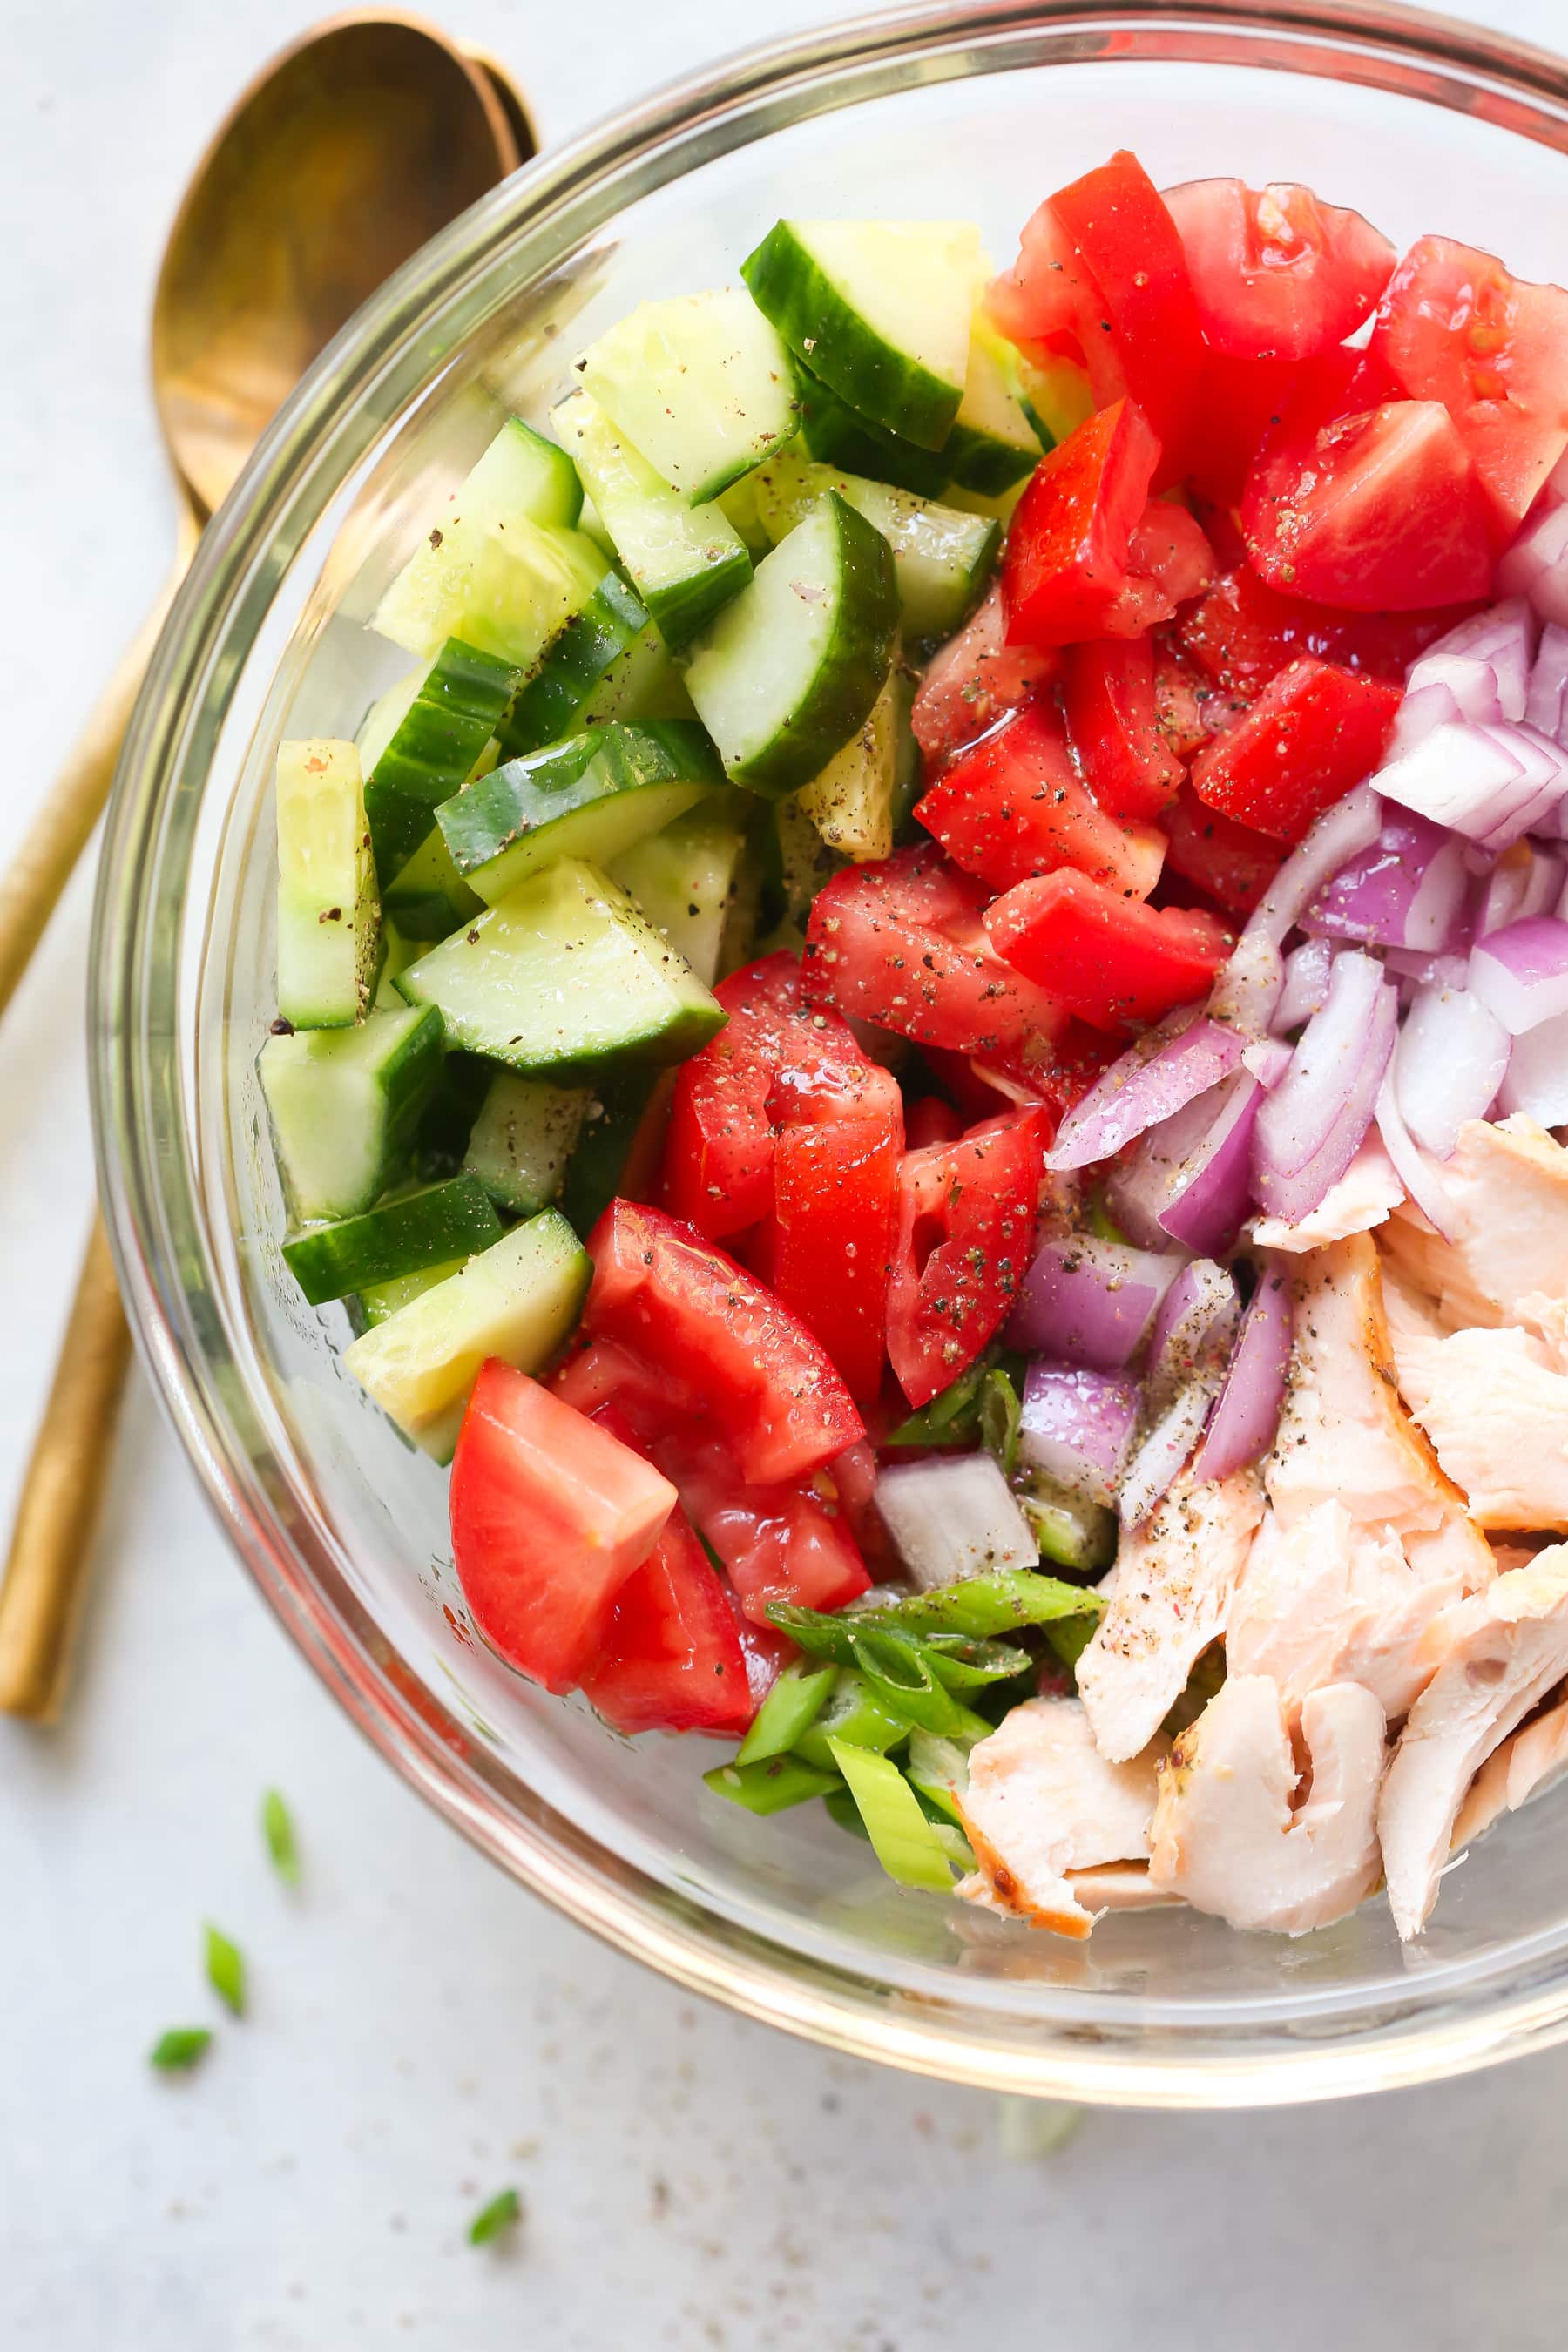 Low-carb Dinner Recipes: overhead view of chopped salmon salad